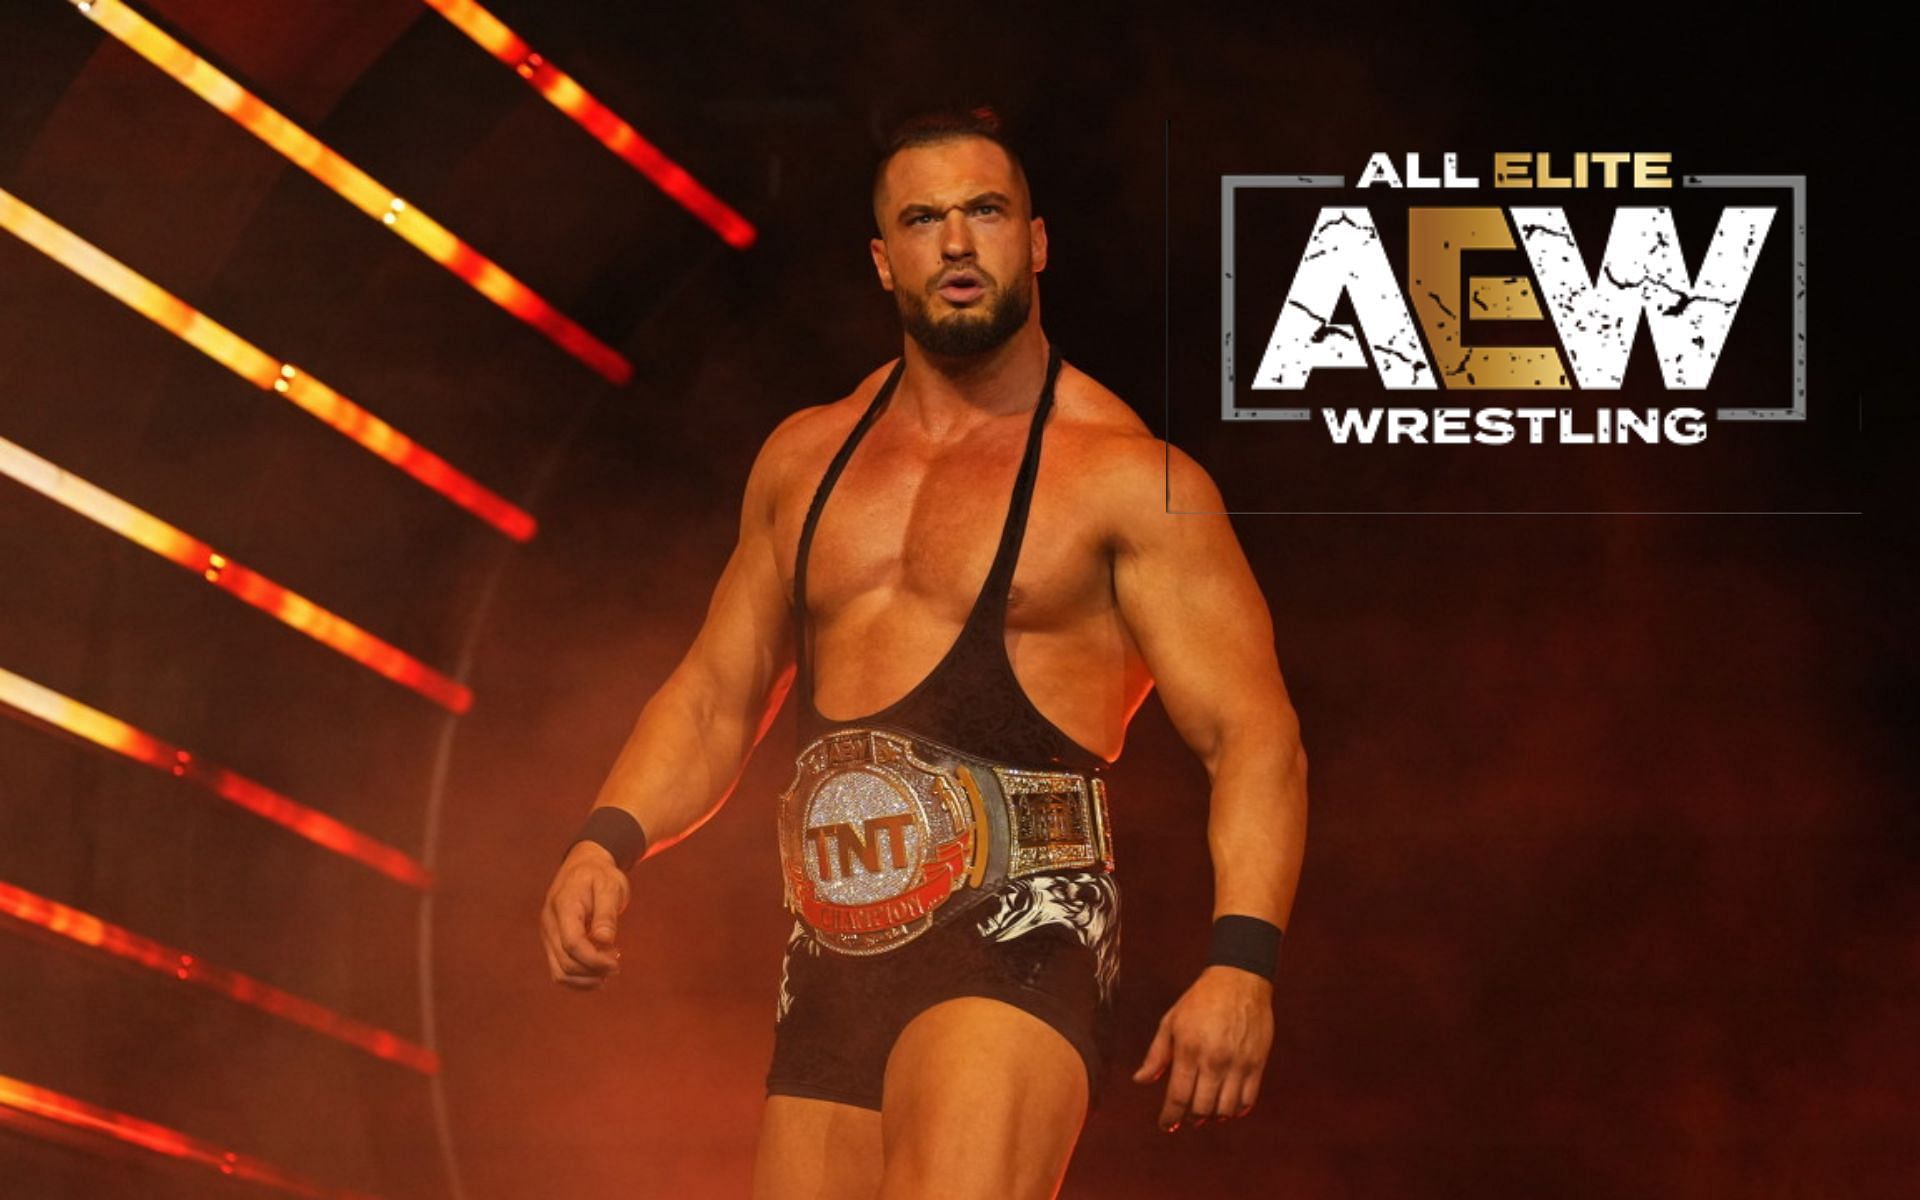 Wardlow signed with AEW in 2020 and has had an impressive run since